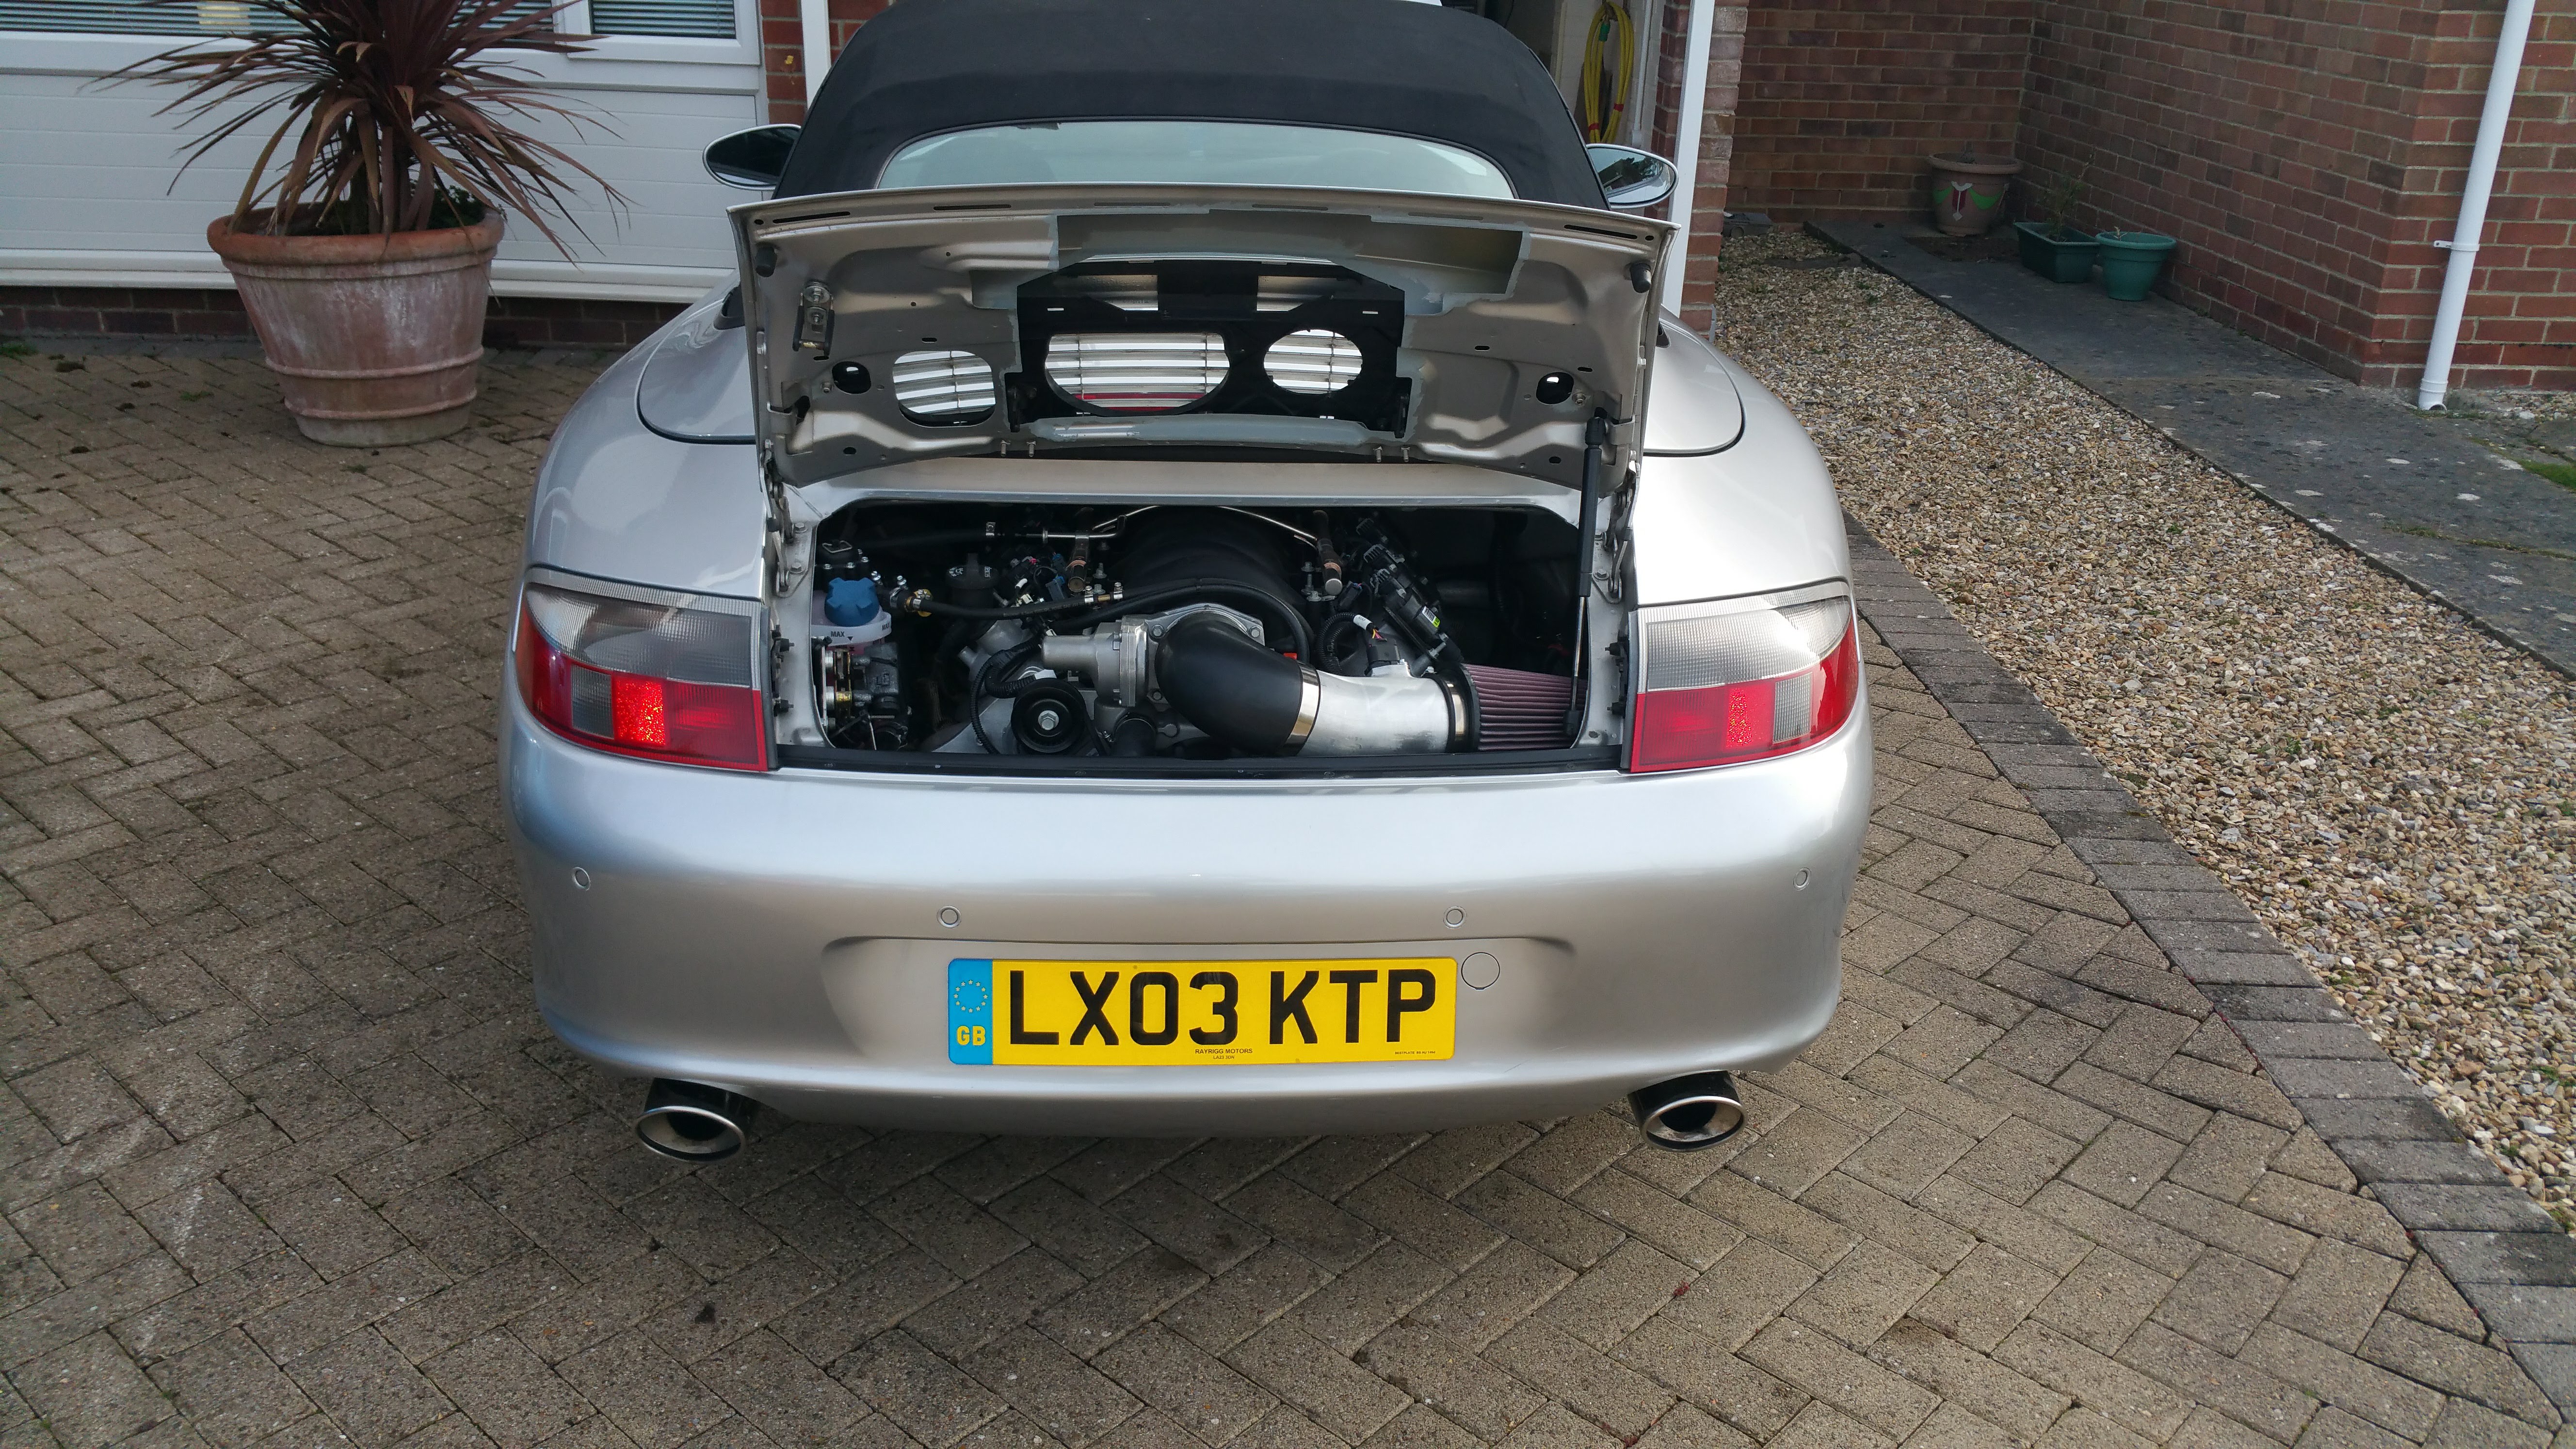 Porsche 996 6.2 V8 - Page 1 - Readers' Cars - PistonHeads